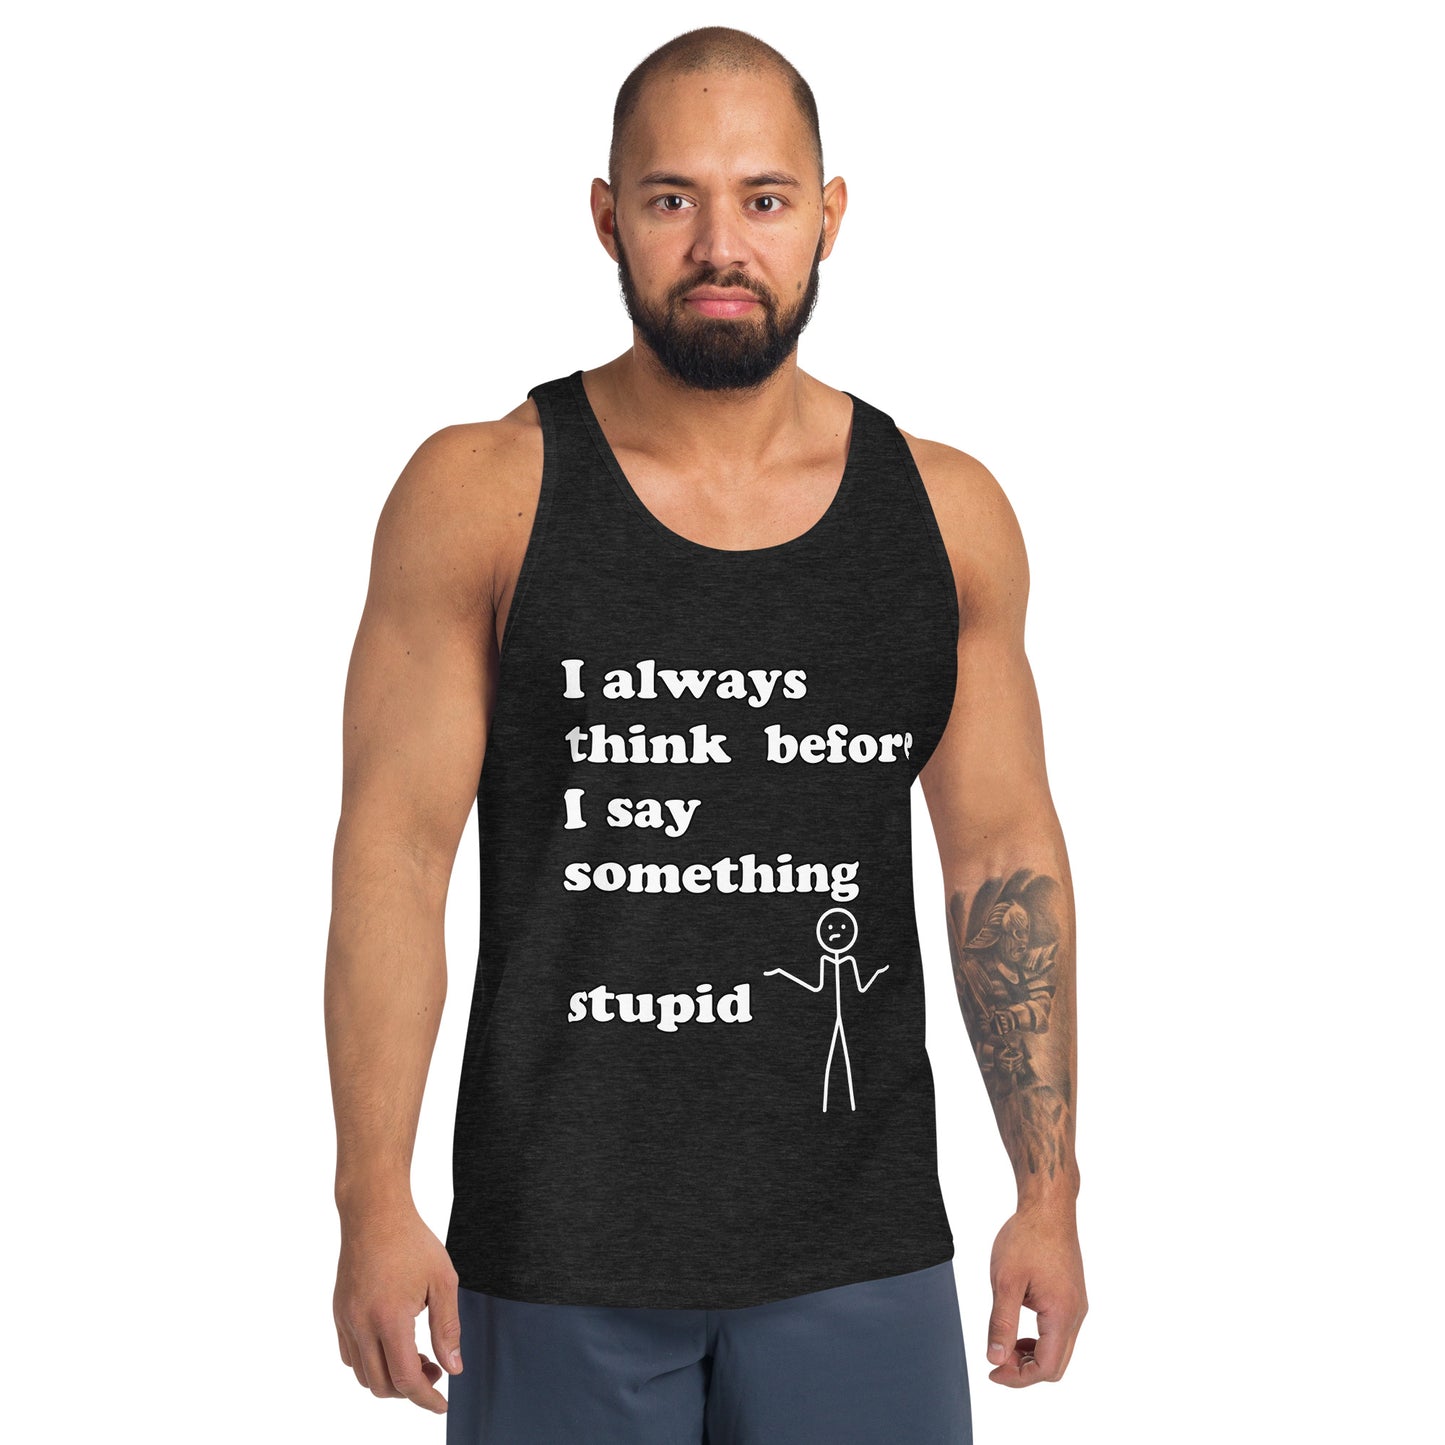 Man with dark grey tank top with text "I always think before I say something stupid"